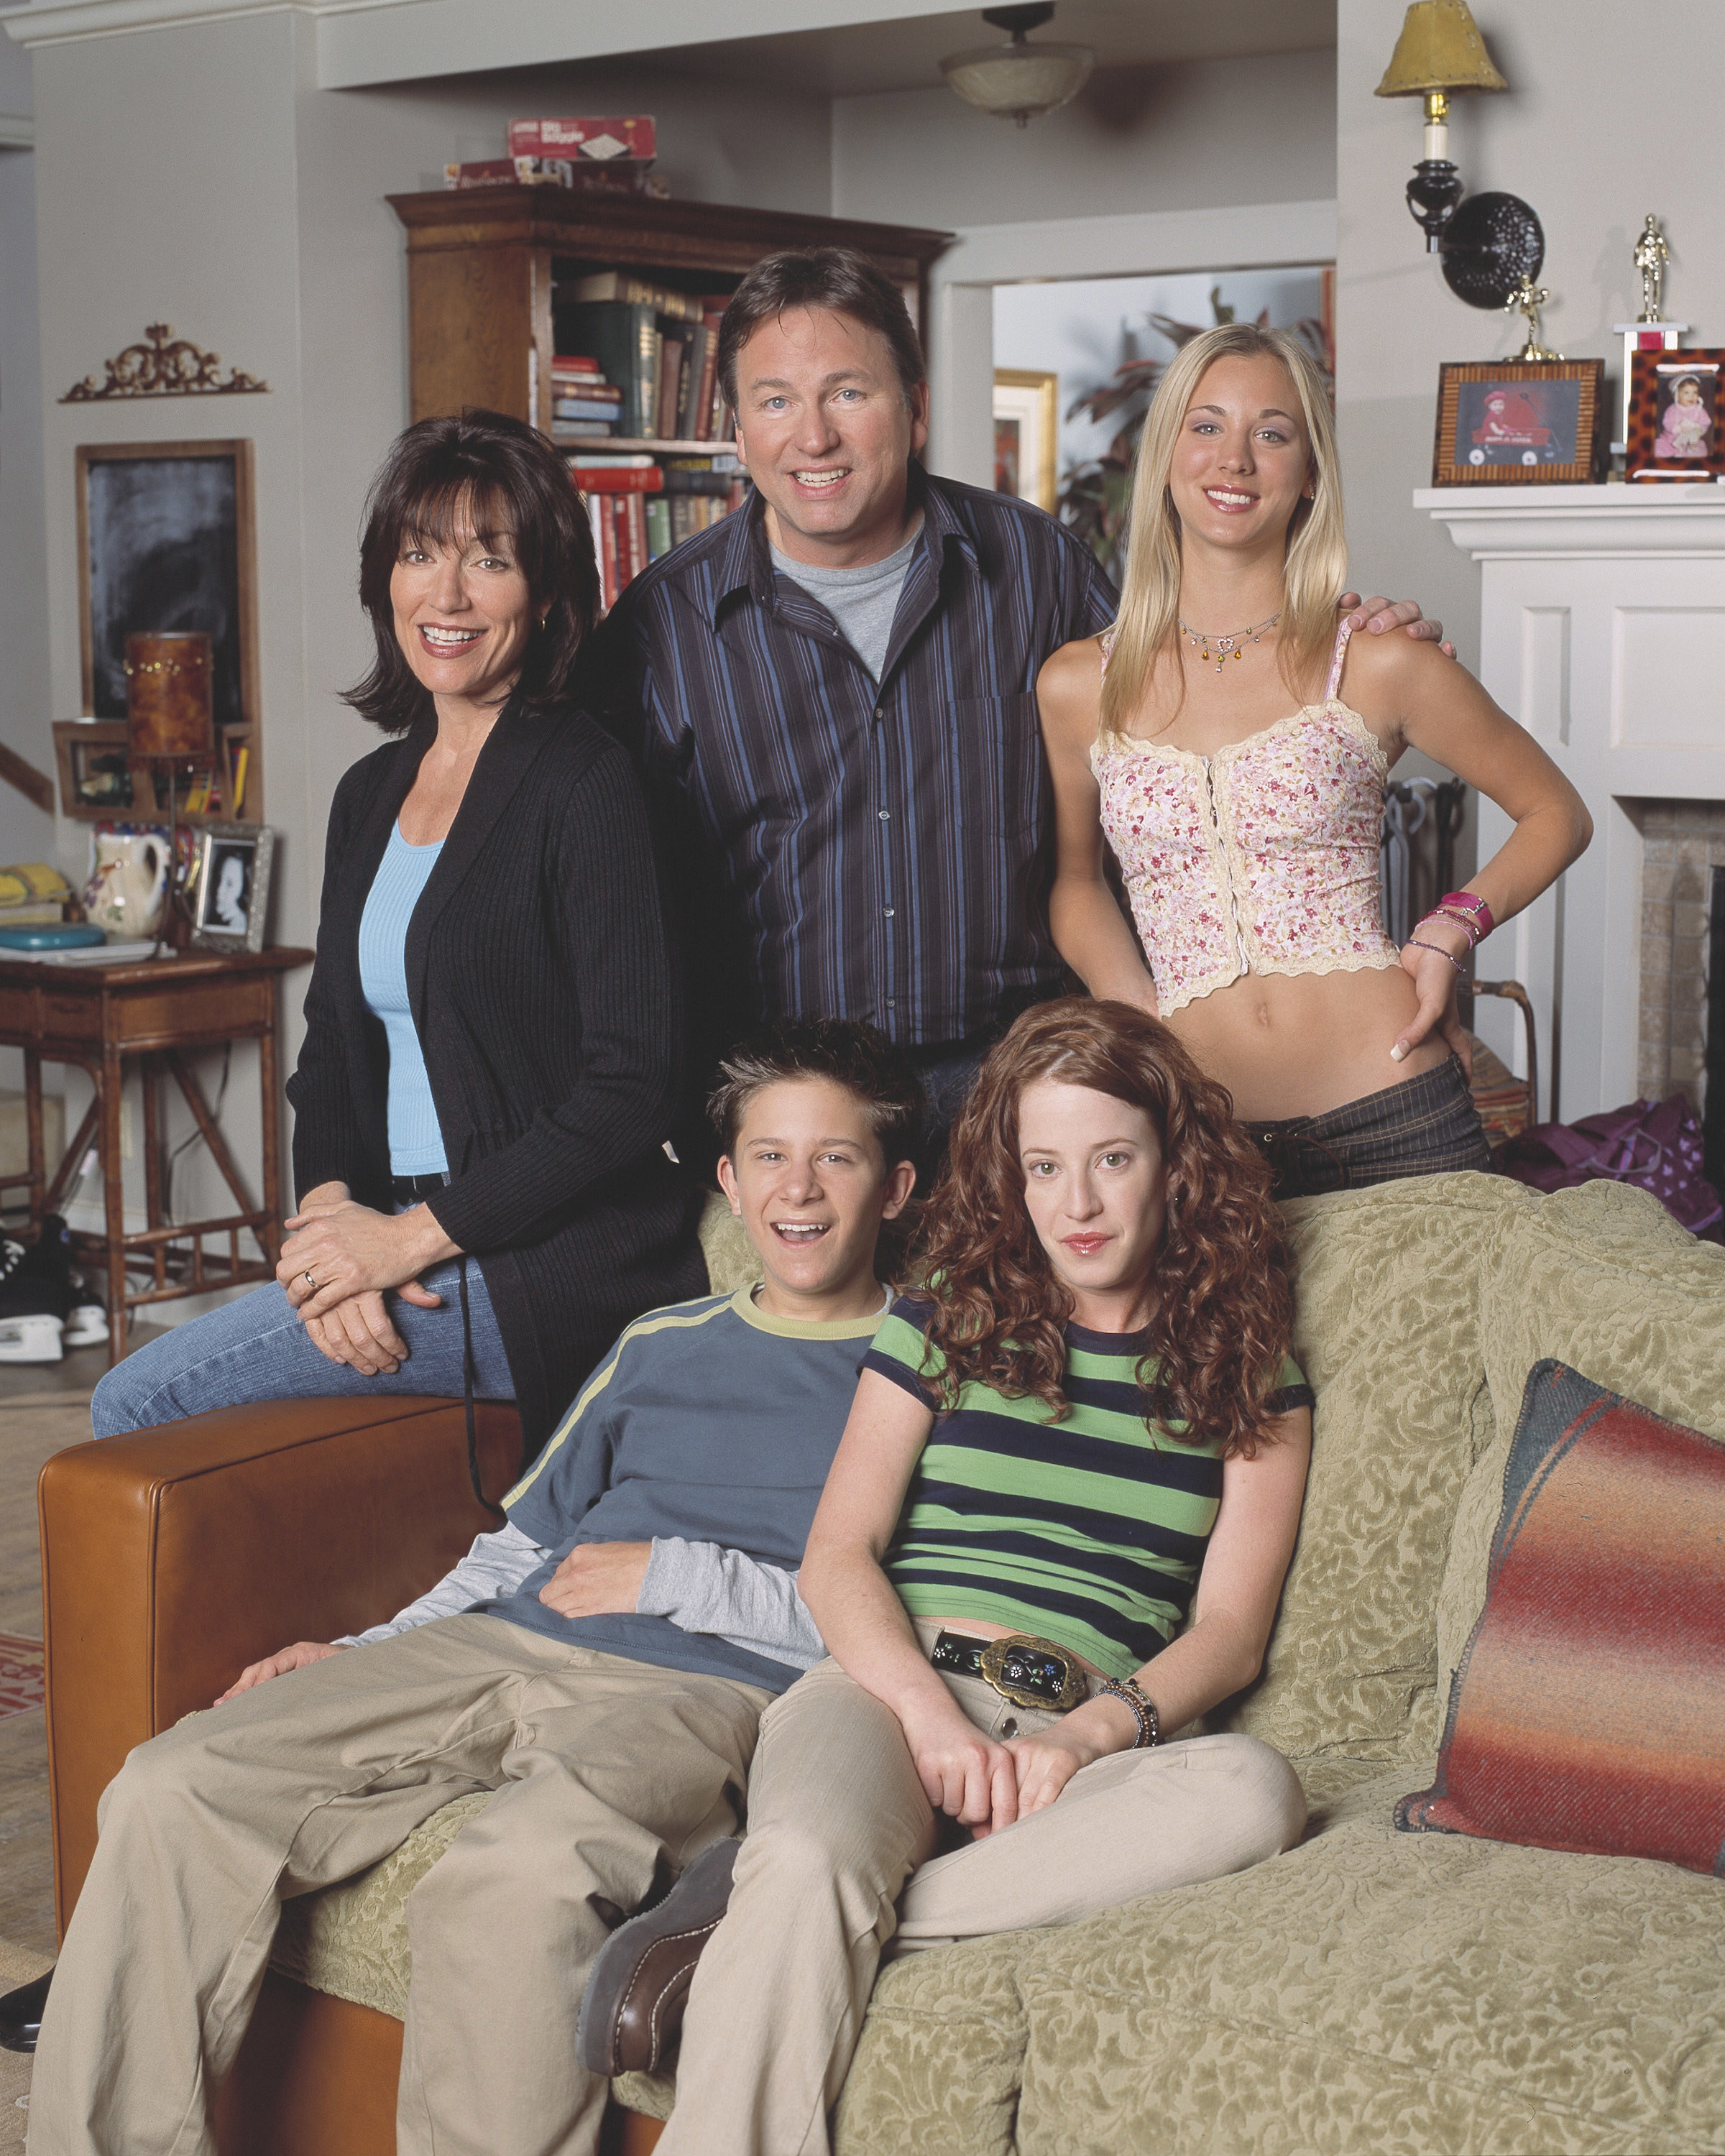 8 Simple Rules cast